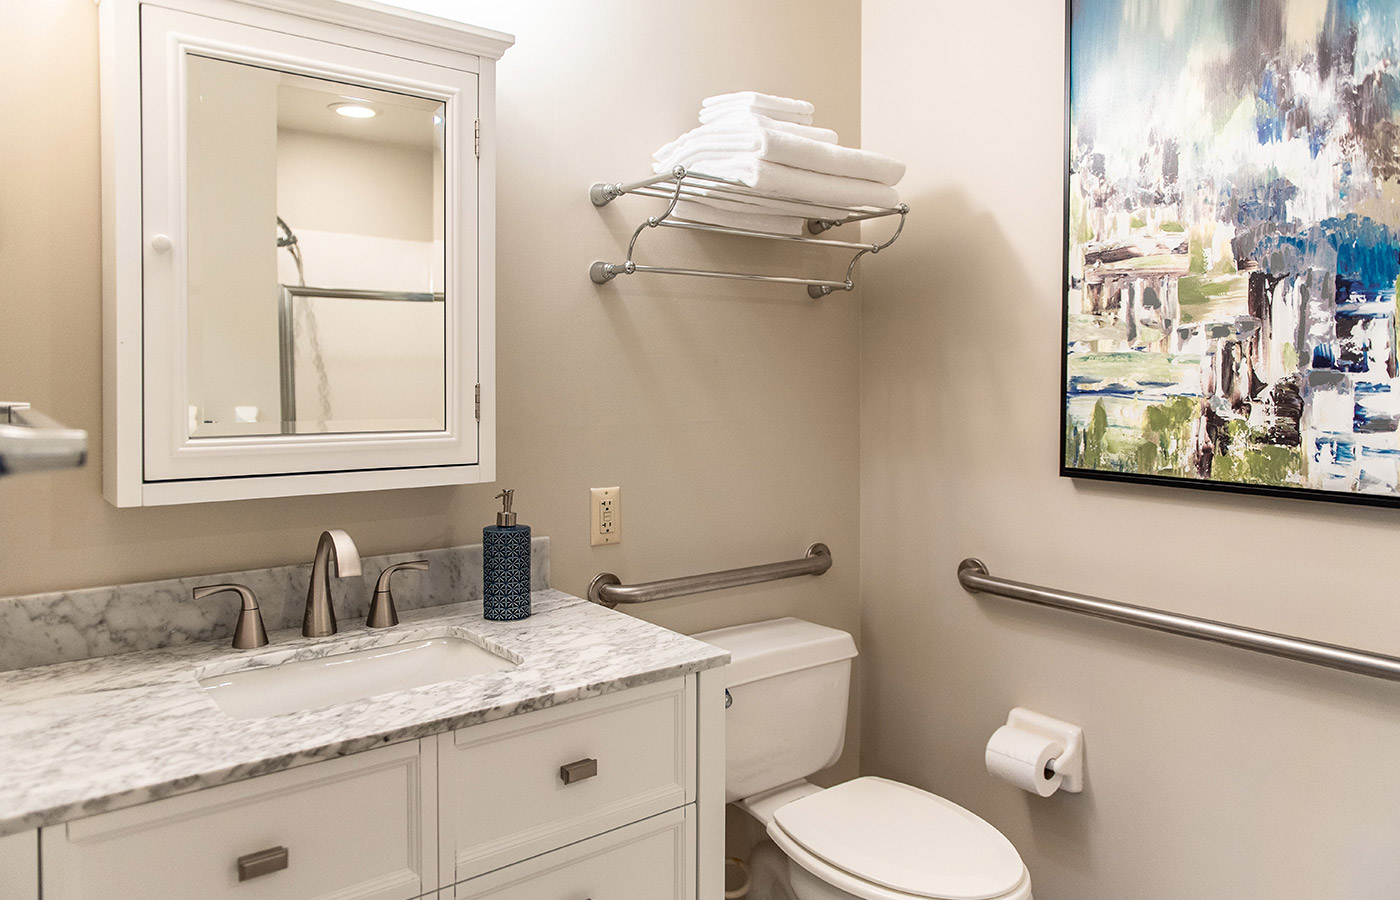 A bathroom in an apartment at The Legacy at Grand 'Vie.